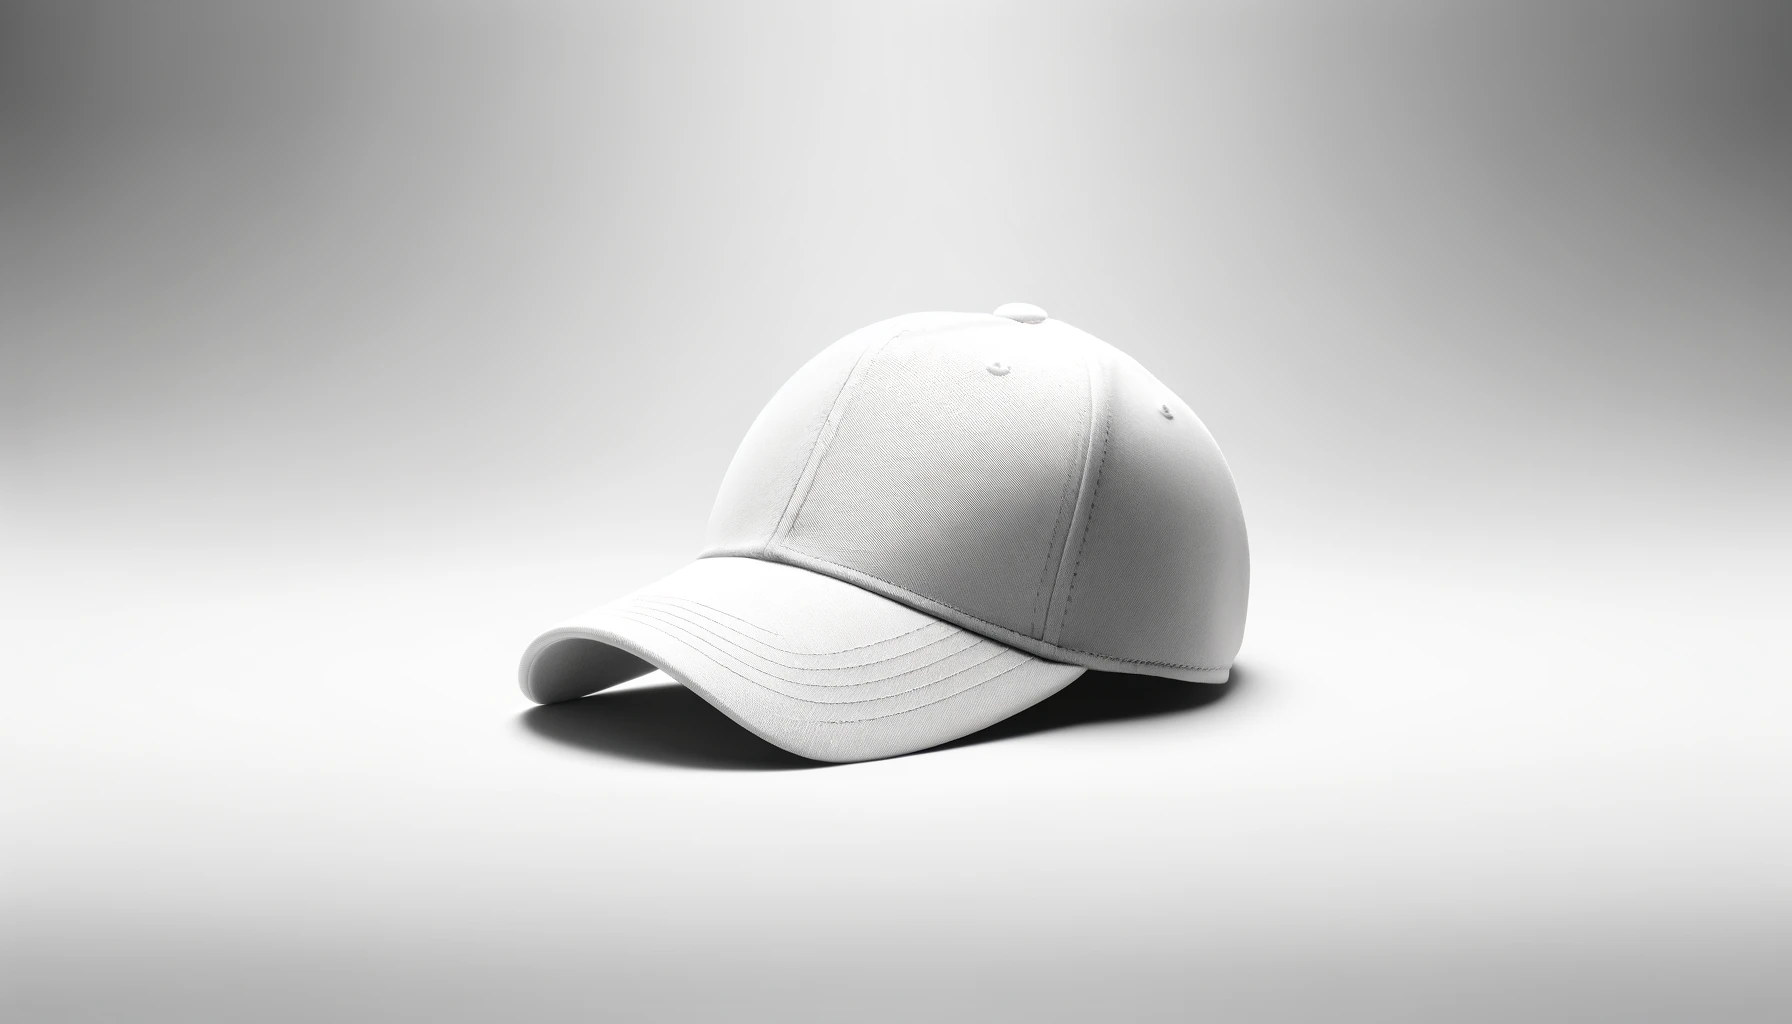 A freshly washed and clean cap placed on a clean white surface, showing its pristine condition.